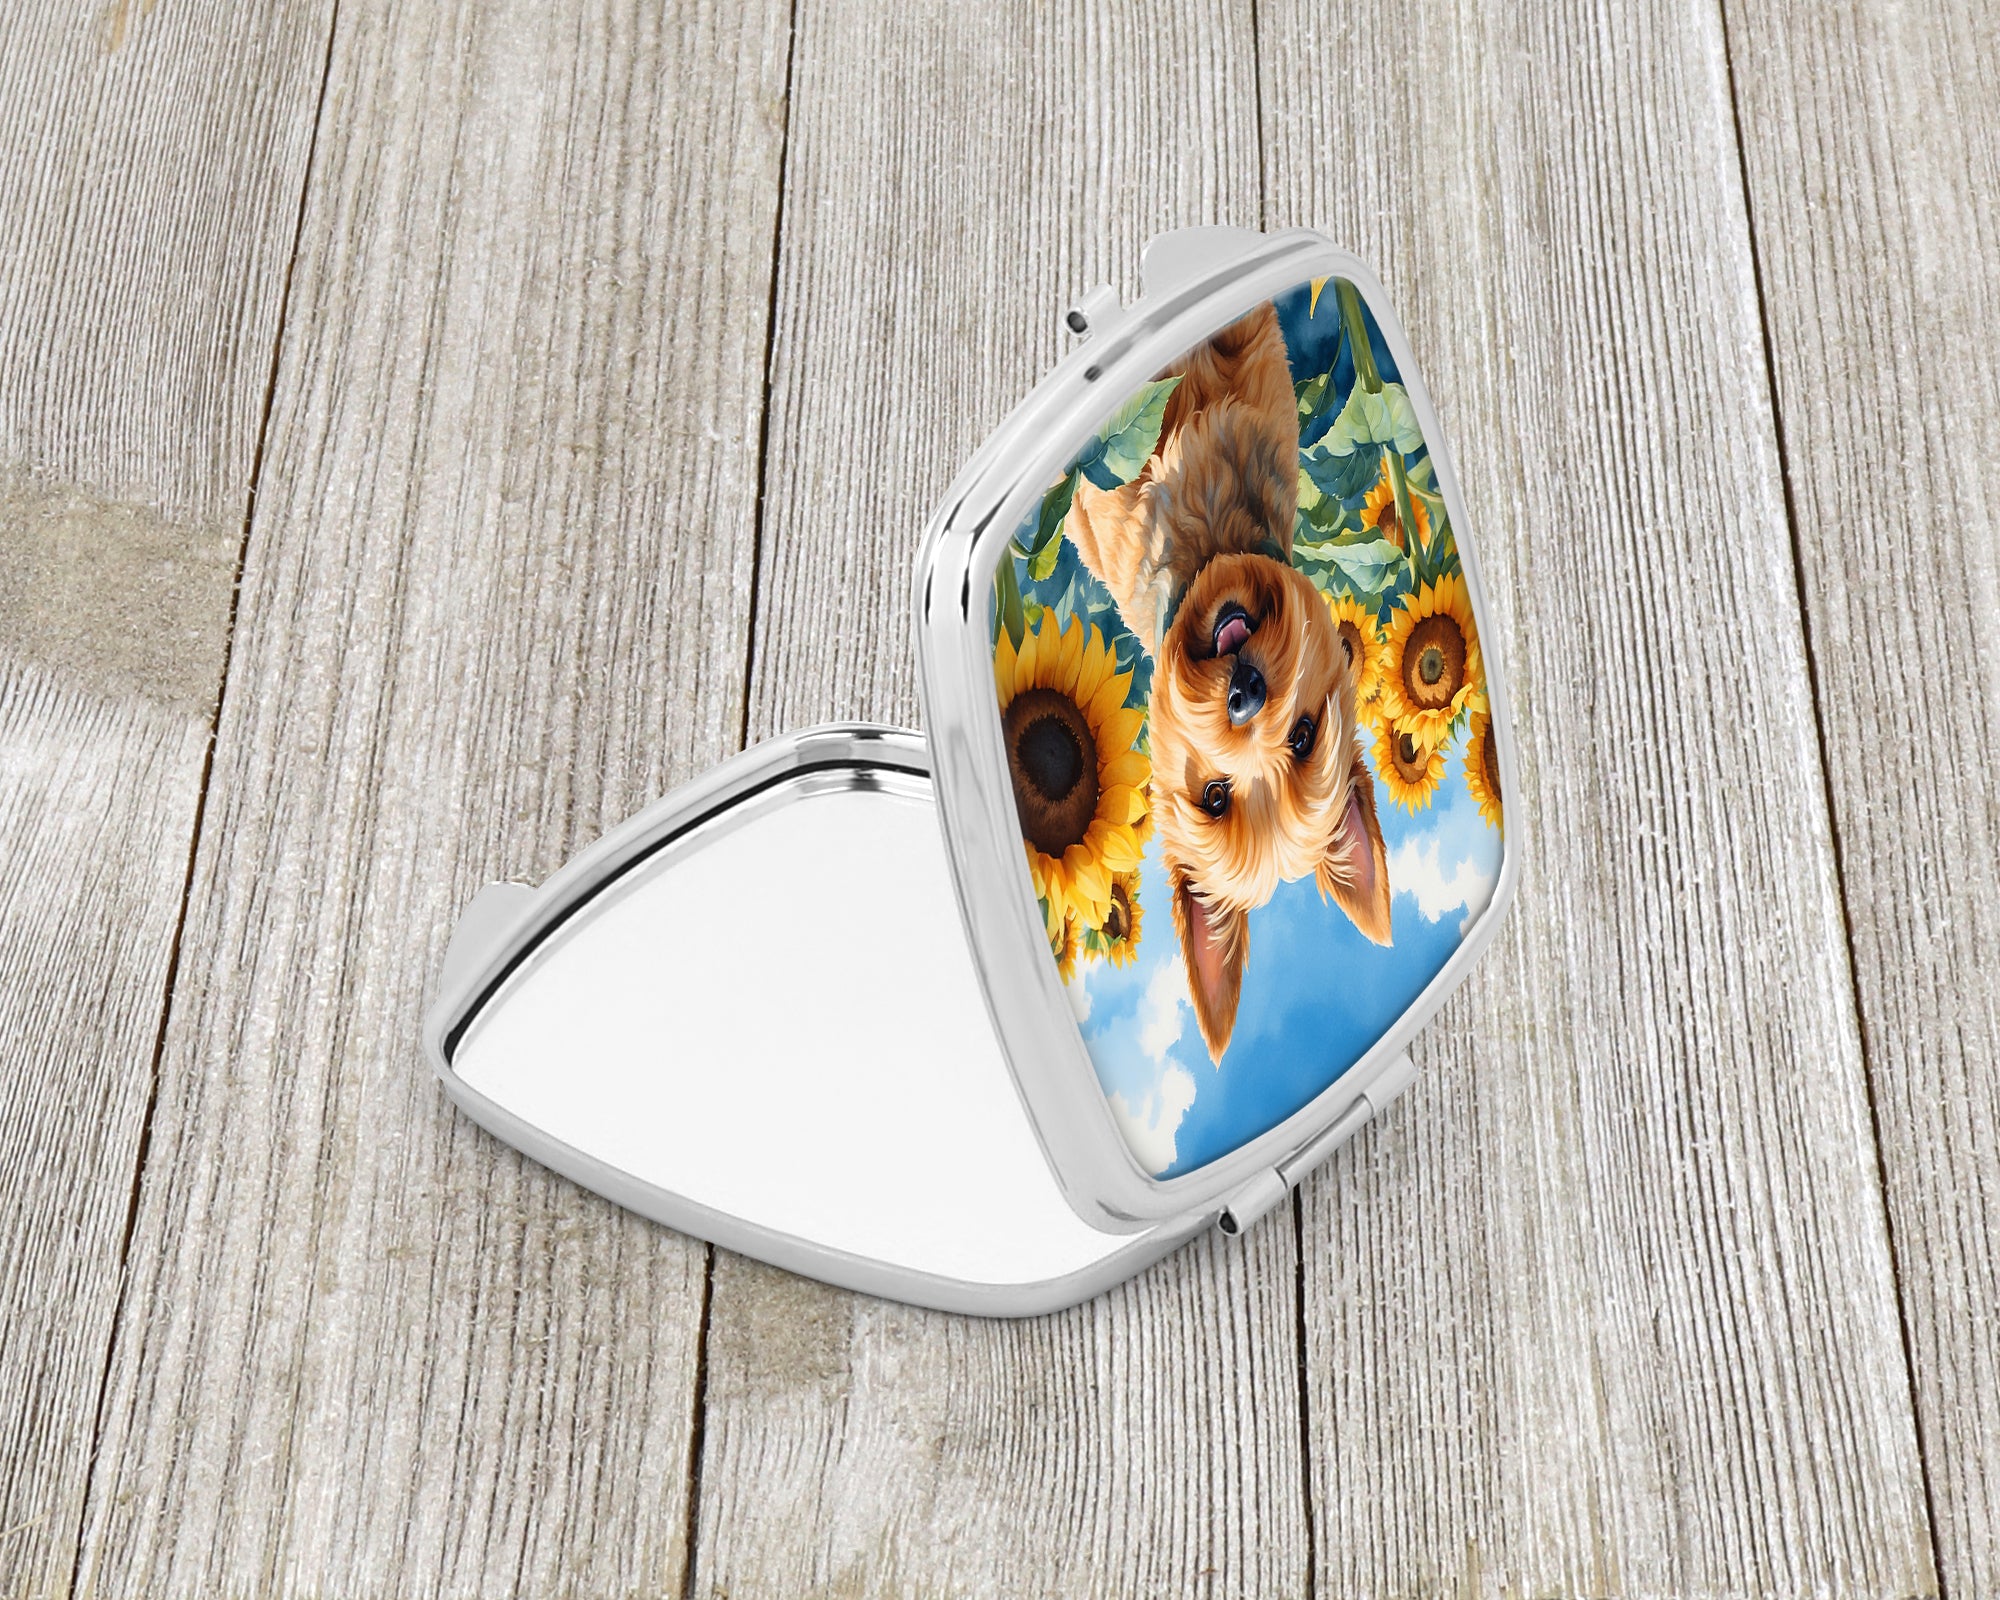 Norwich Terrier in Sunflowers Compact Mirror